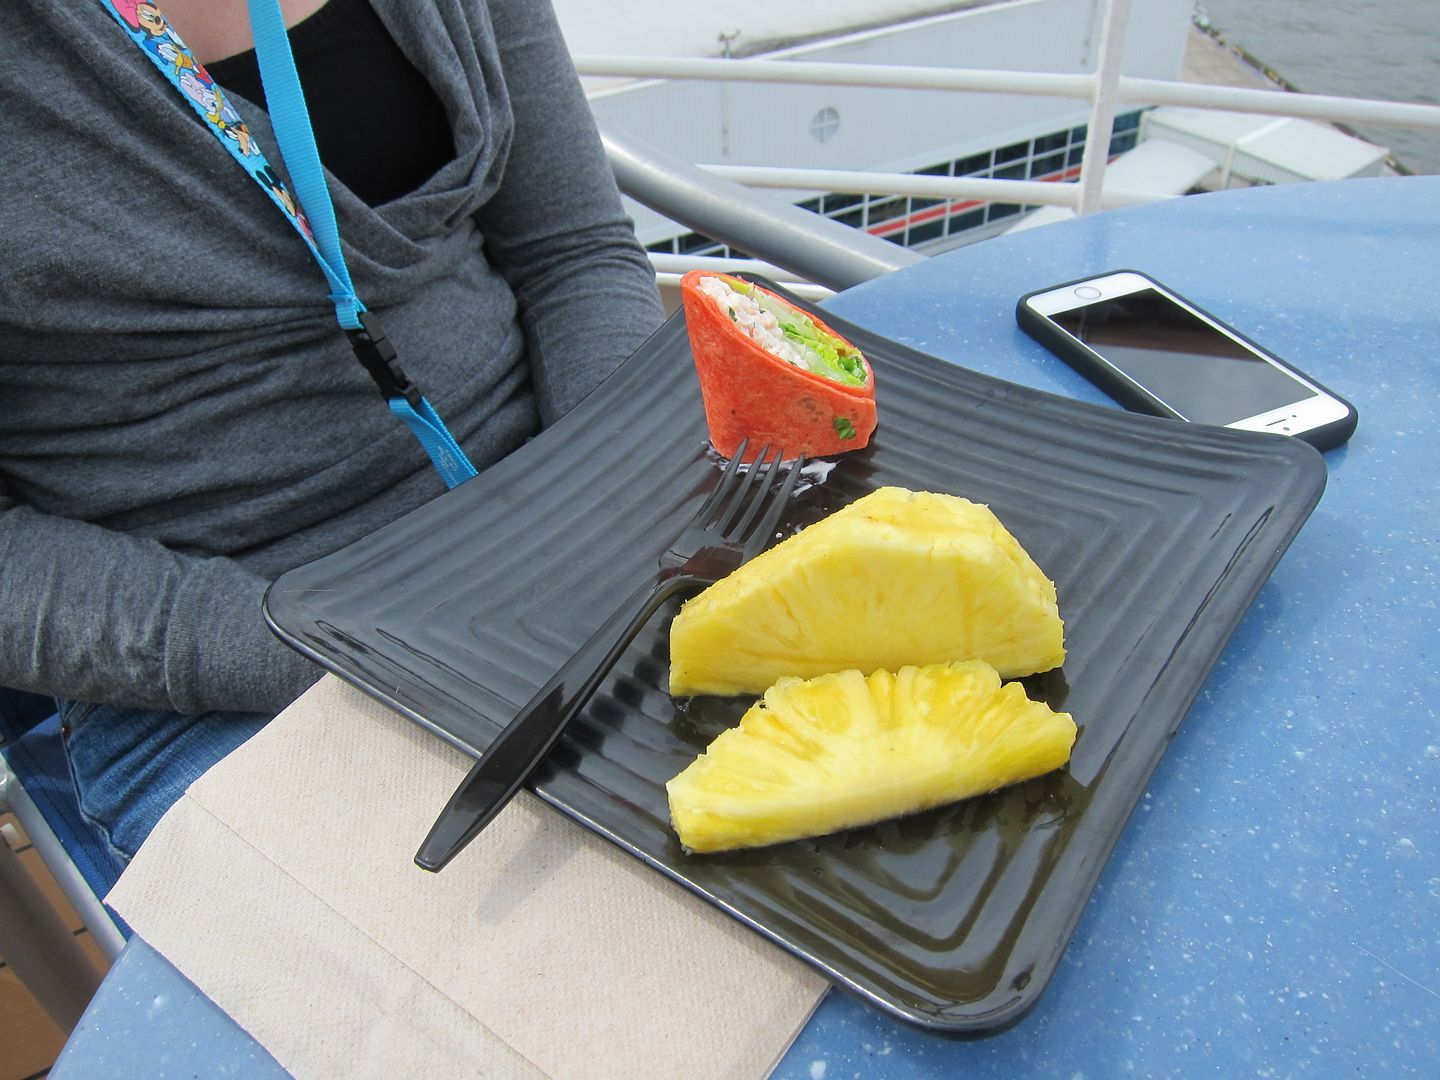 Wrap and Pineapple from Goofy's Galley | Disney Wonder